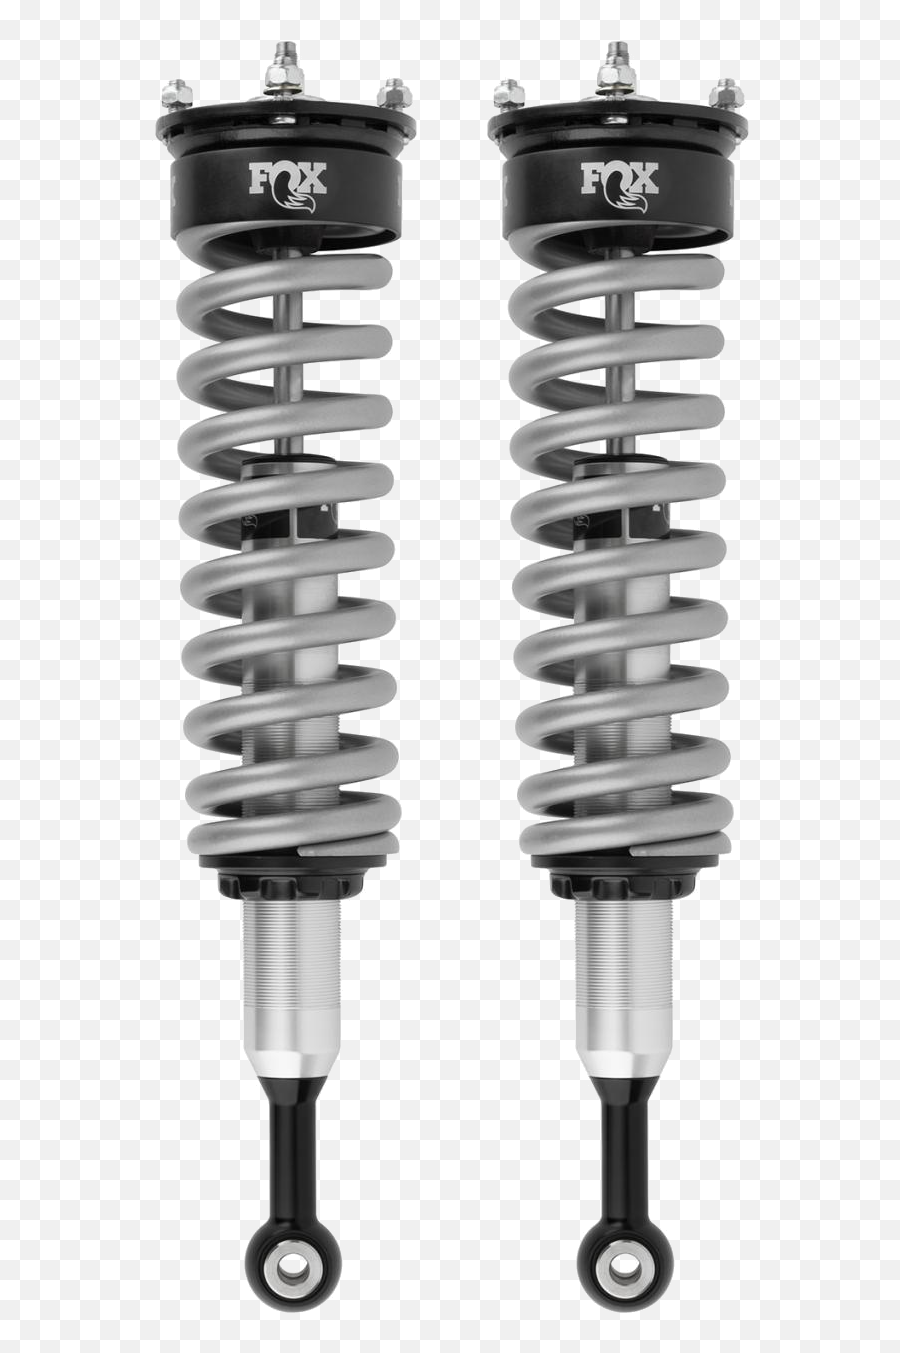 Fox Performance 20 Body 2 Lift Front Coilovers For 2005 - 2020 Toyota Tacoma Fox Coilover Png,Icon Coilover